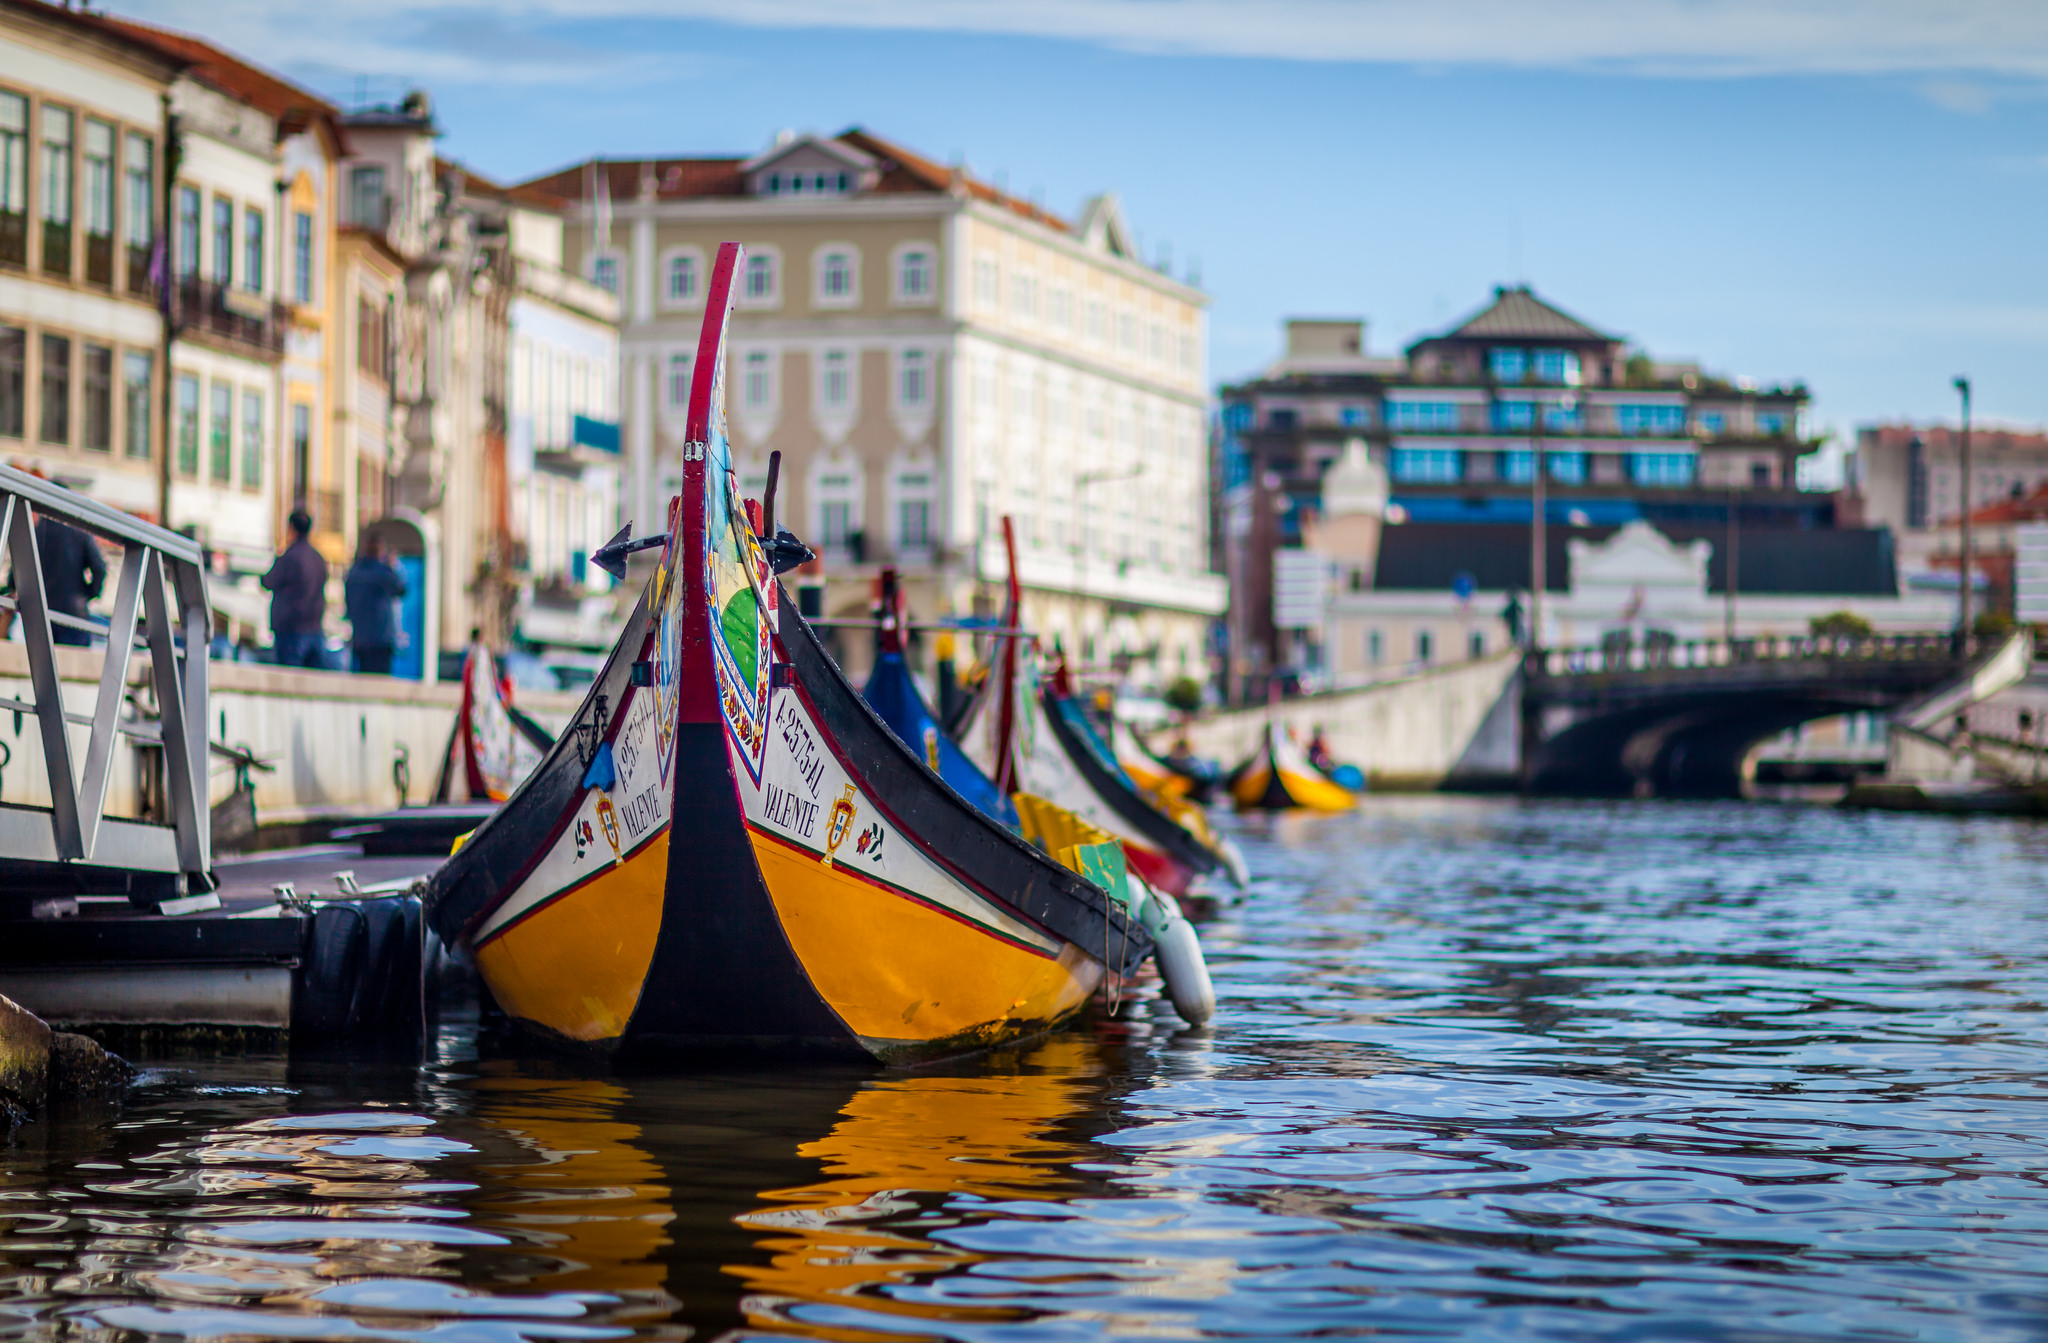 Aveiro and its traditional Moliceiro boat, Portugal. Photo by Tiago Ferreira.